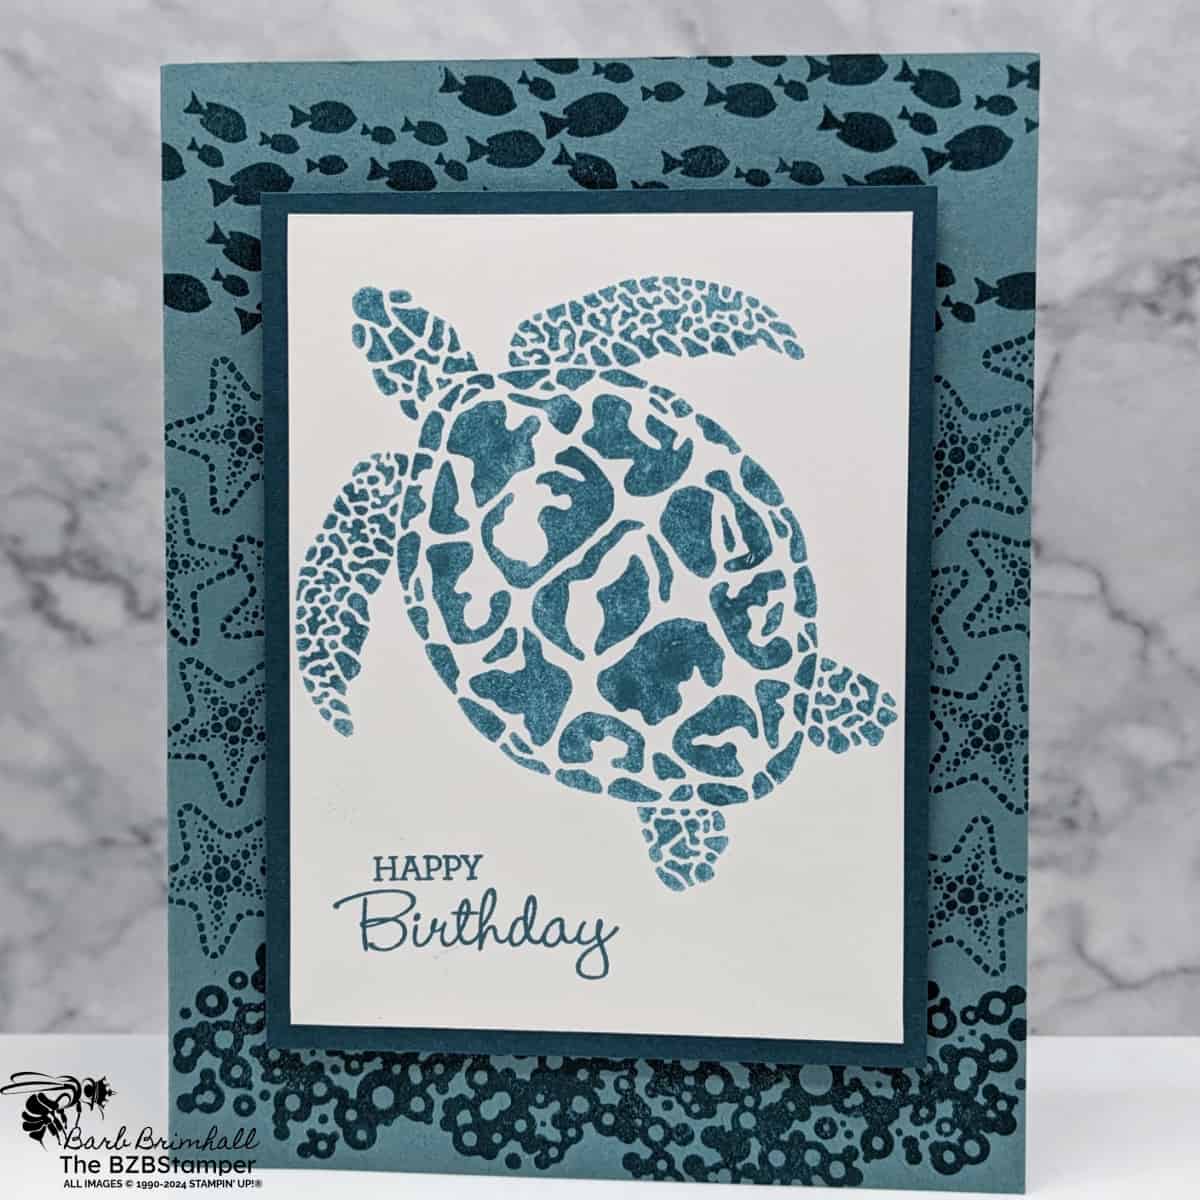 Celebrating Birthdays with the Sea Turtle Stamp Set in greens featuring starfish, fish, bubbles and a large turtle with a Happy Birthday Sentiment. 